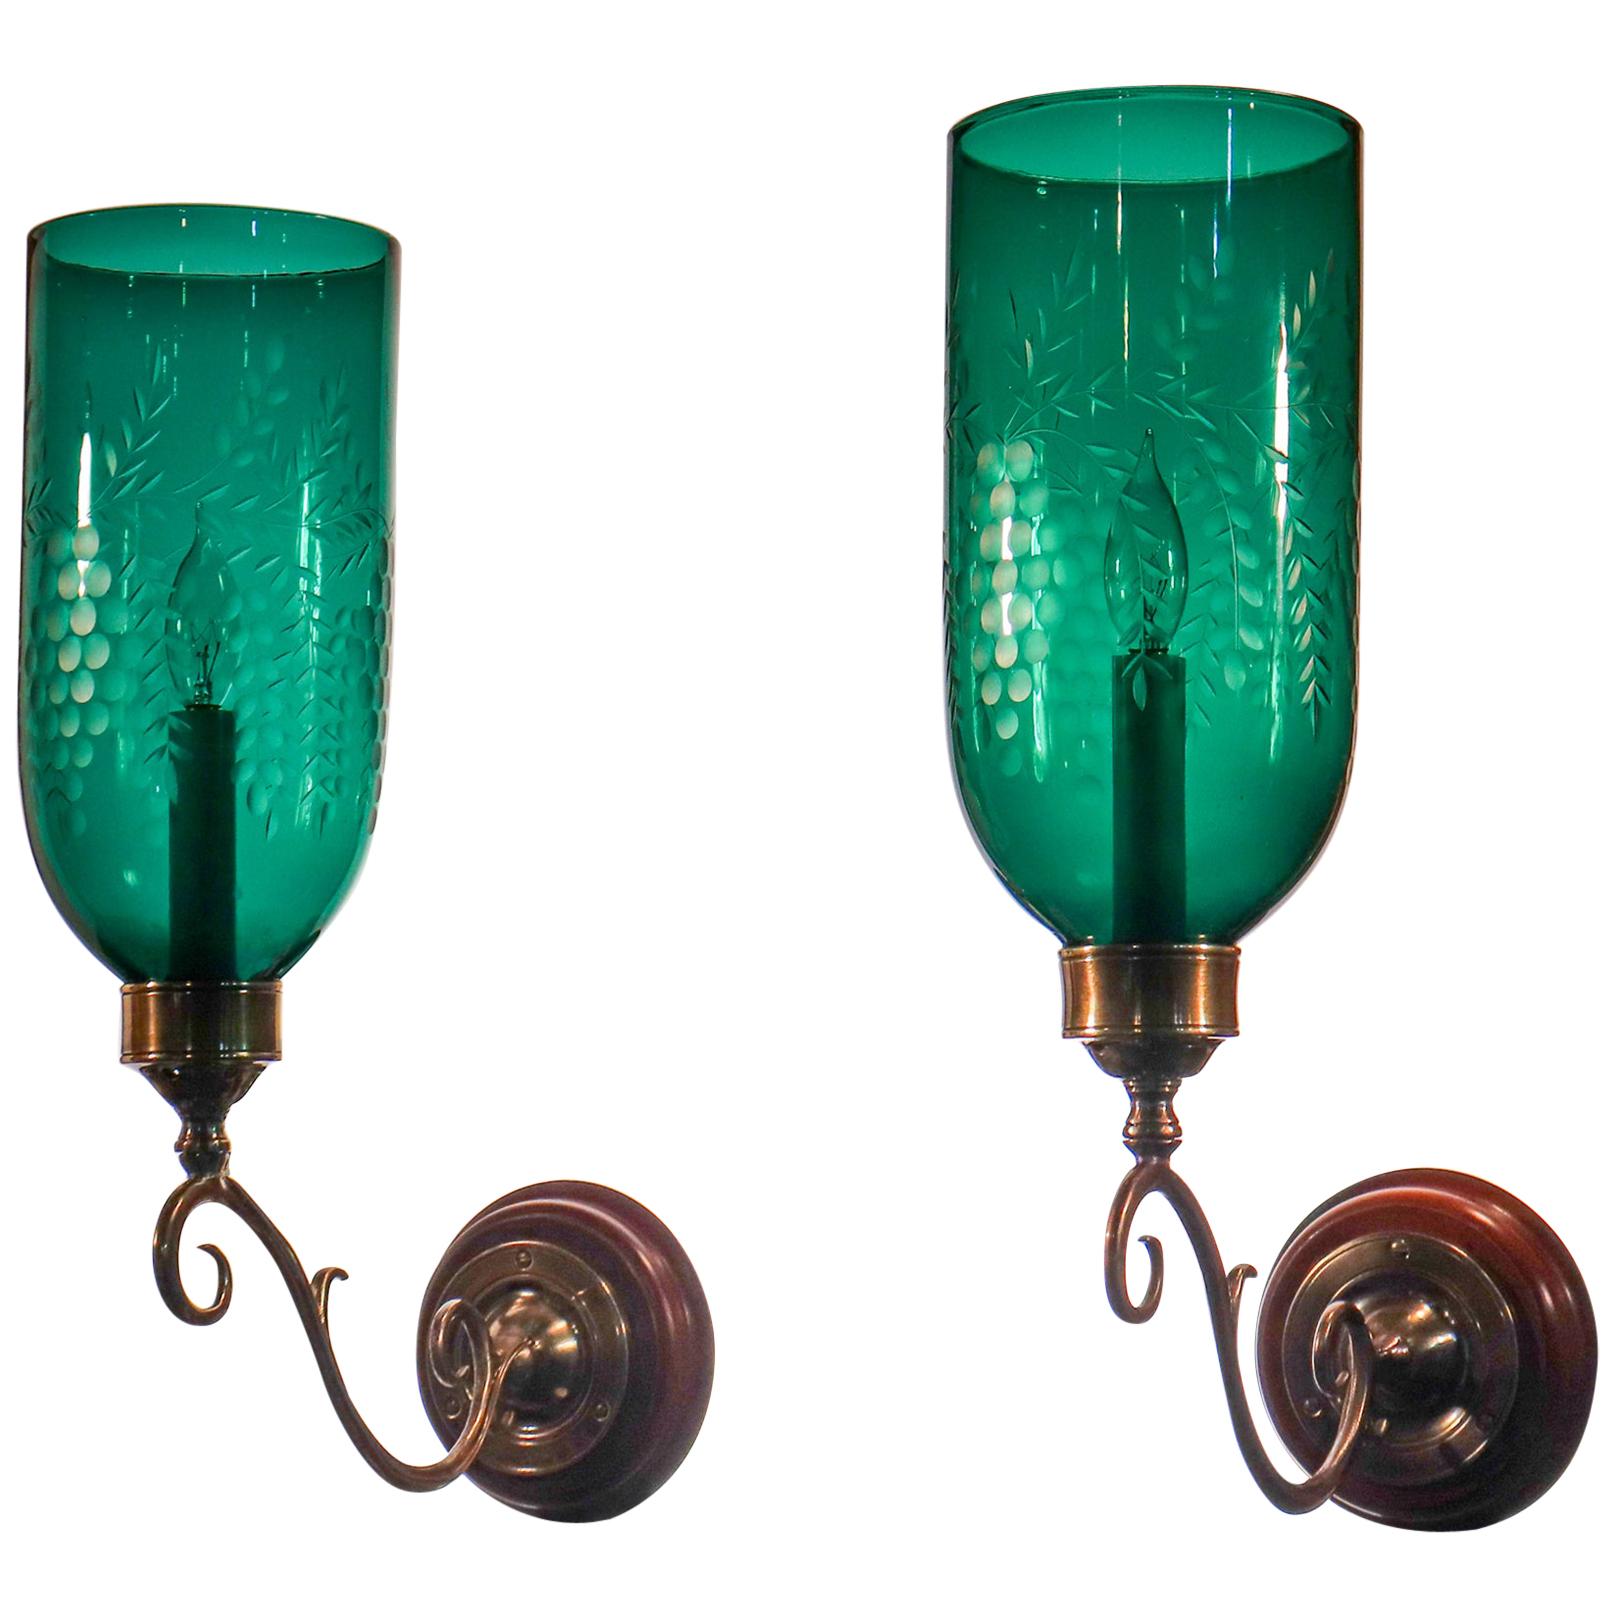 Pair of Antique Emerald Green Hurricane Shade Wall Sconces